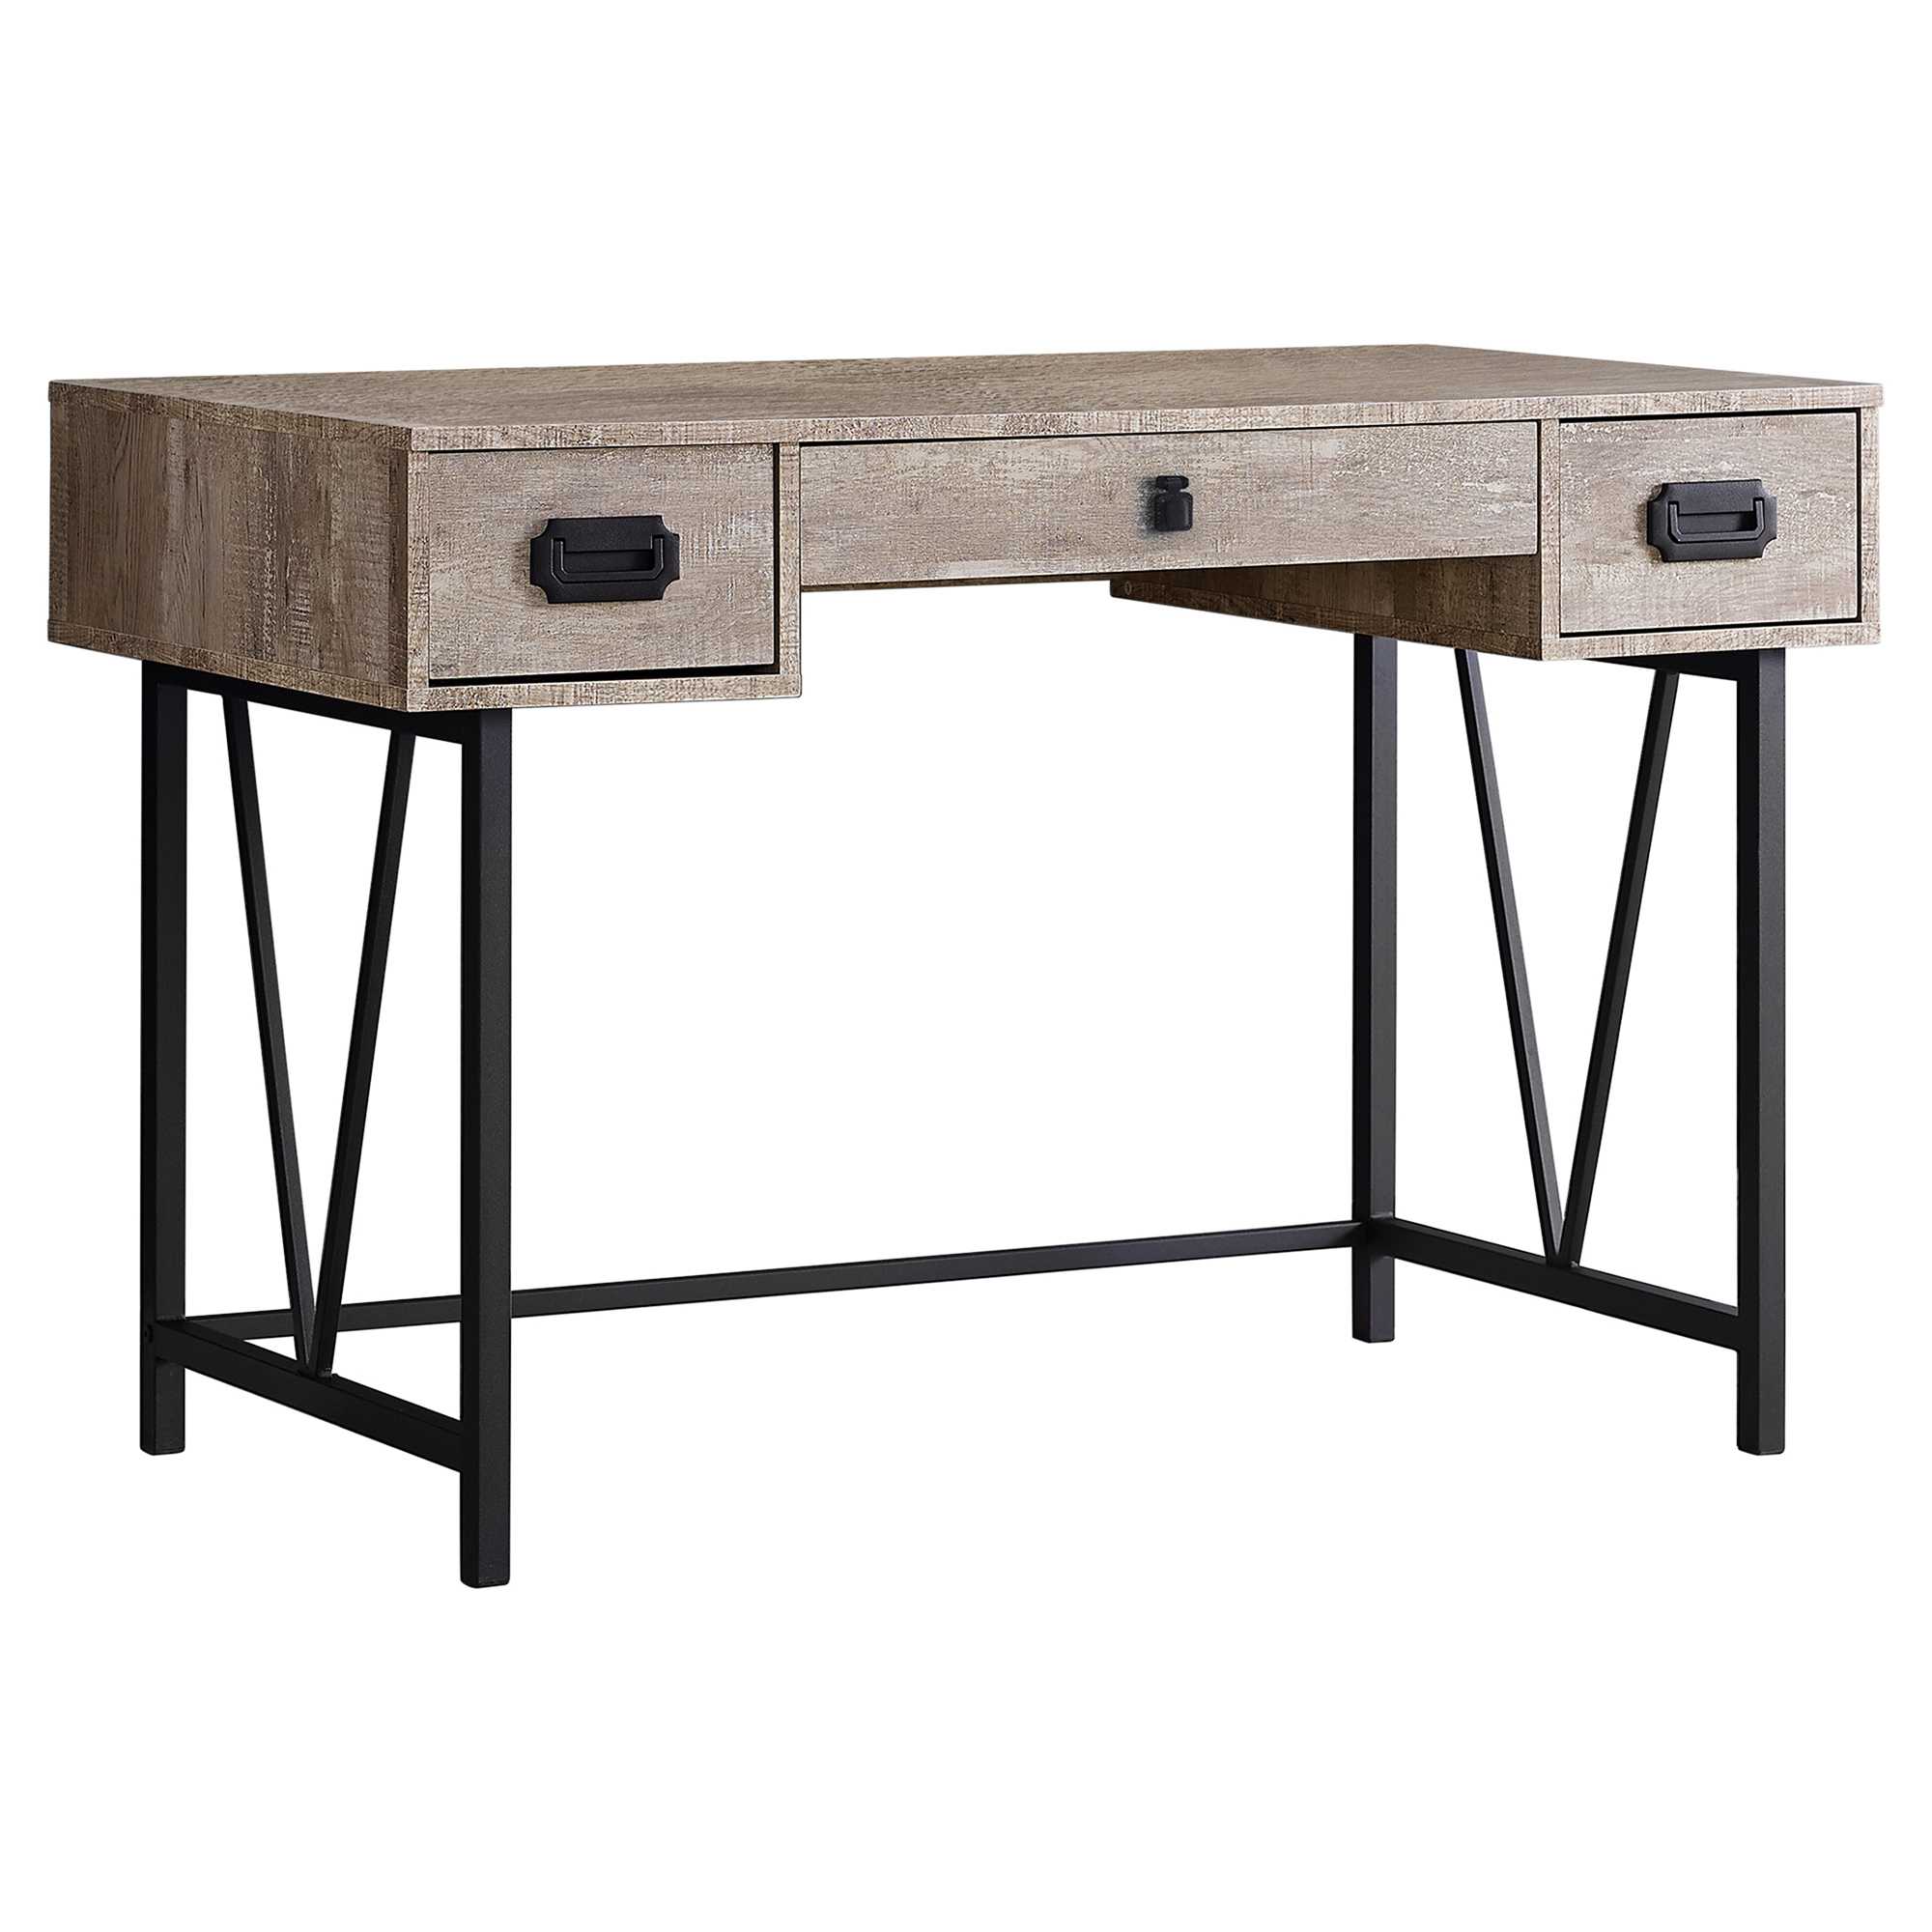 23.75" x 47.25" x 30.75" Taupe Black Particle Board Hollow Core Metal Computer Desk